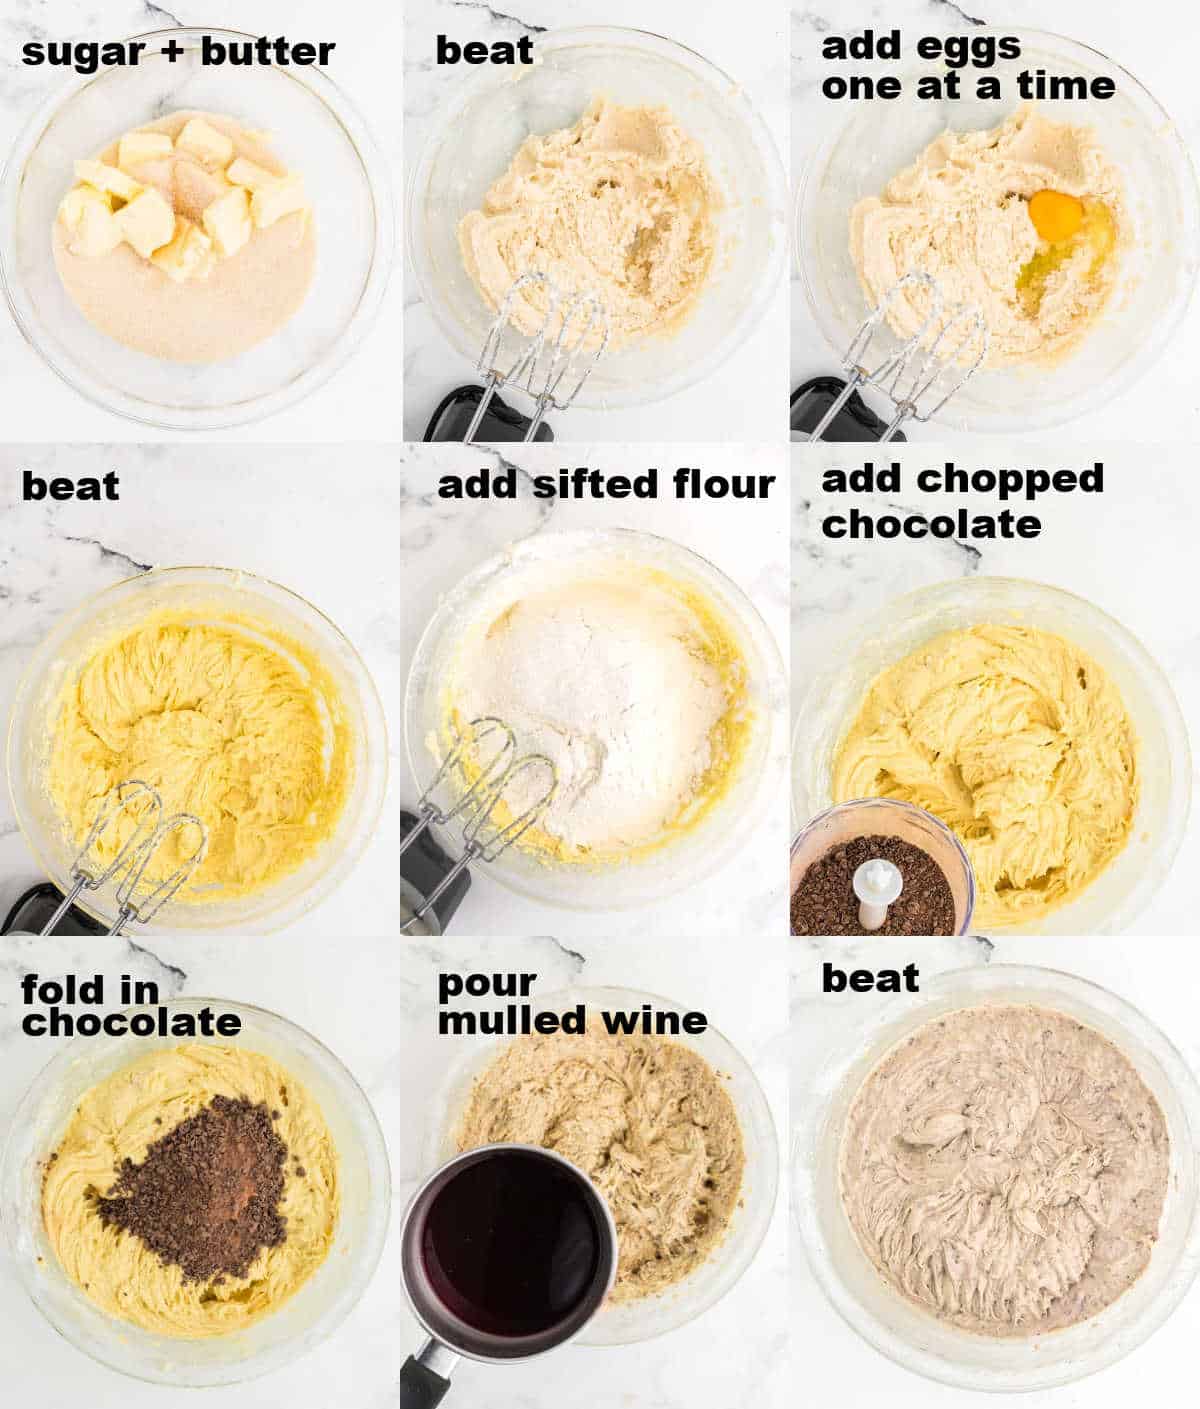 Step-by-step ingredients how to make the mulled wine cake batter